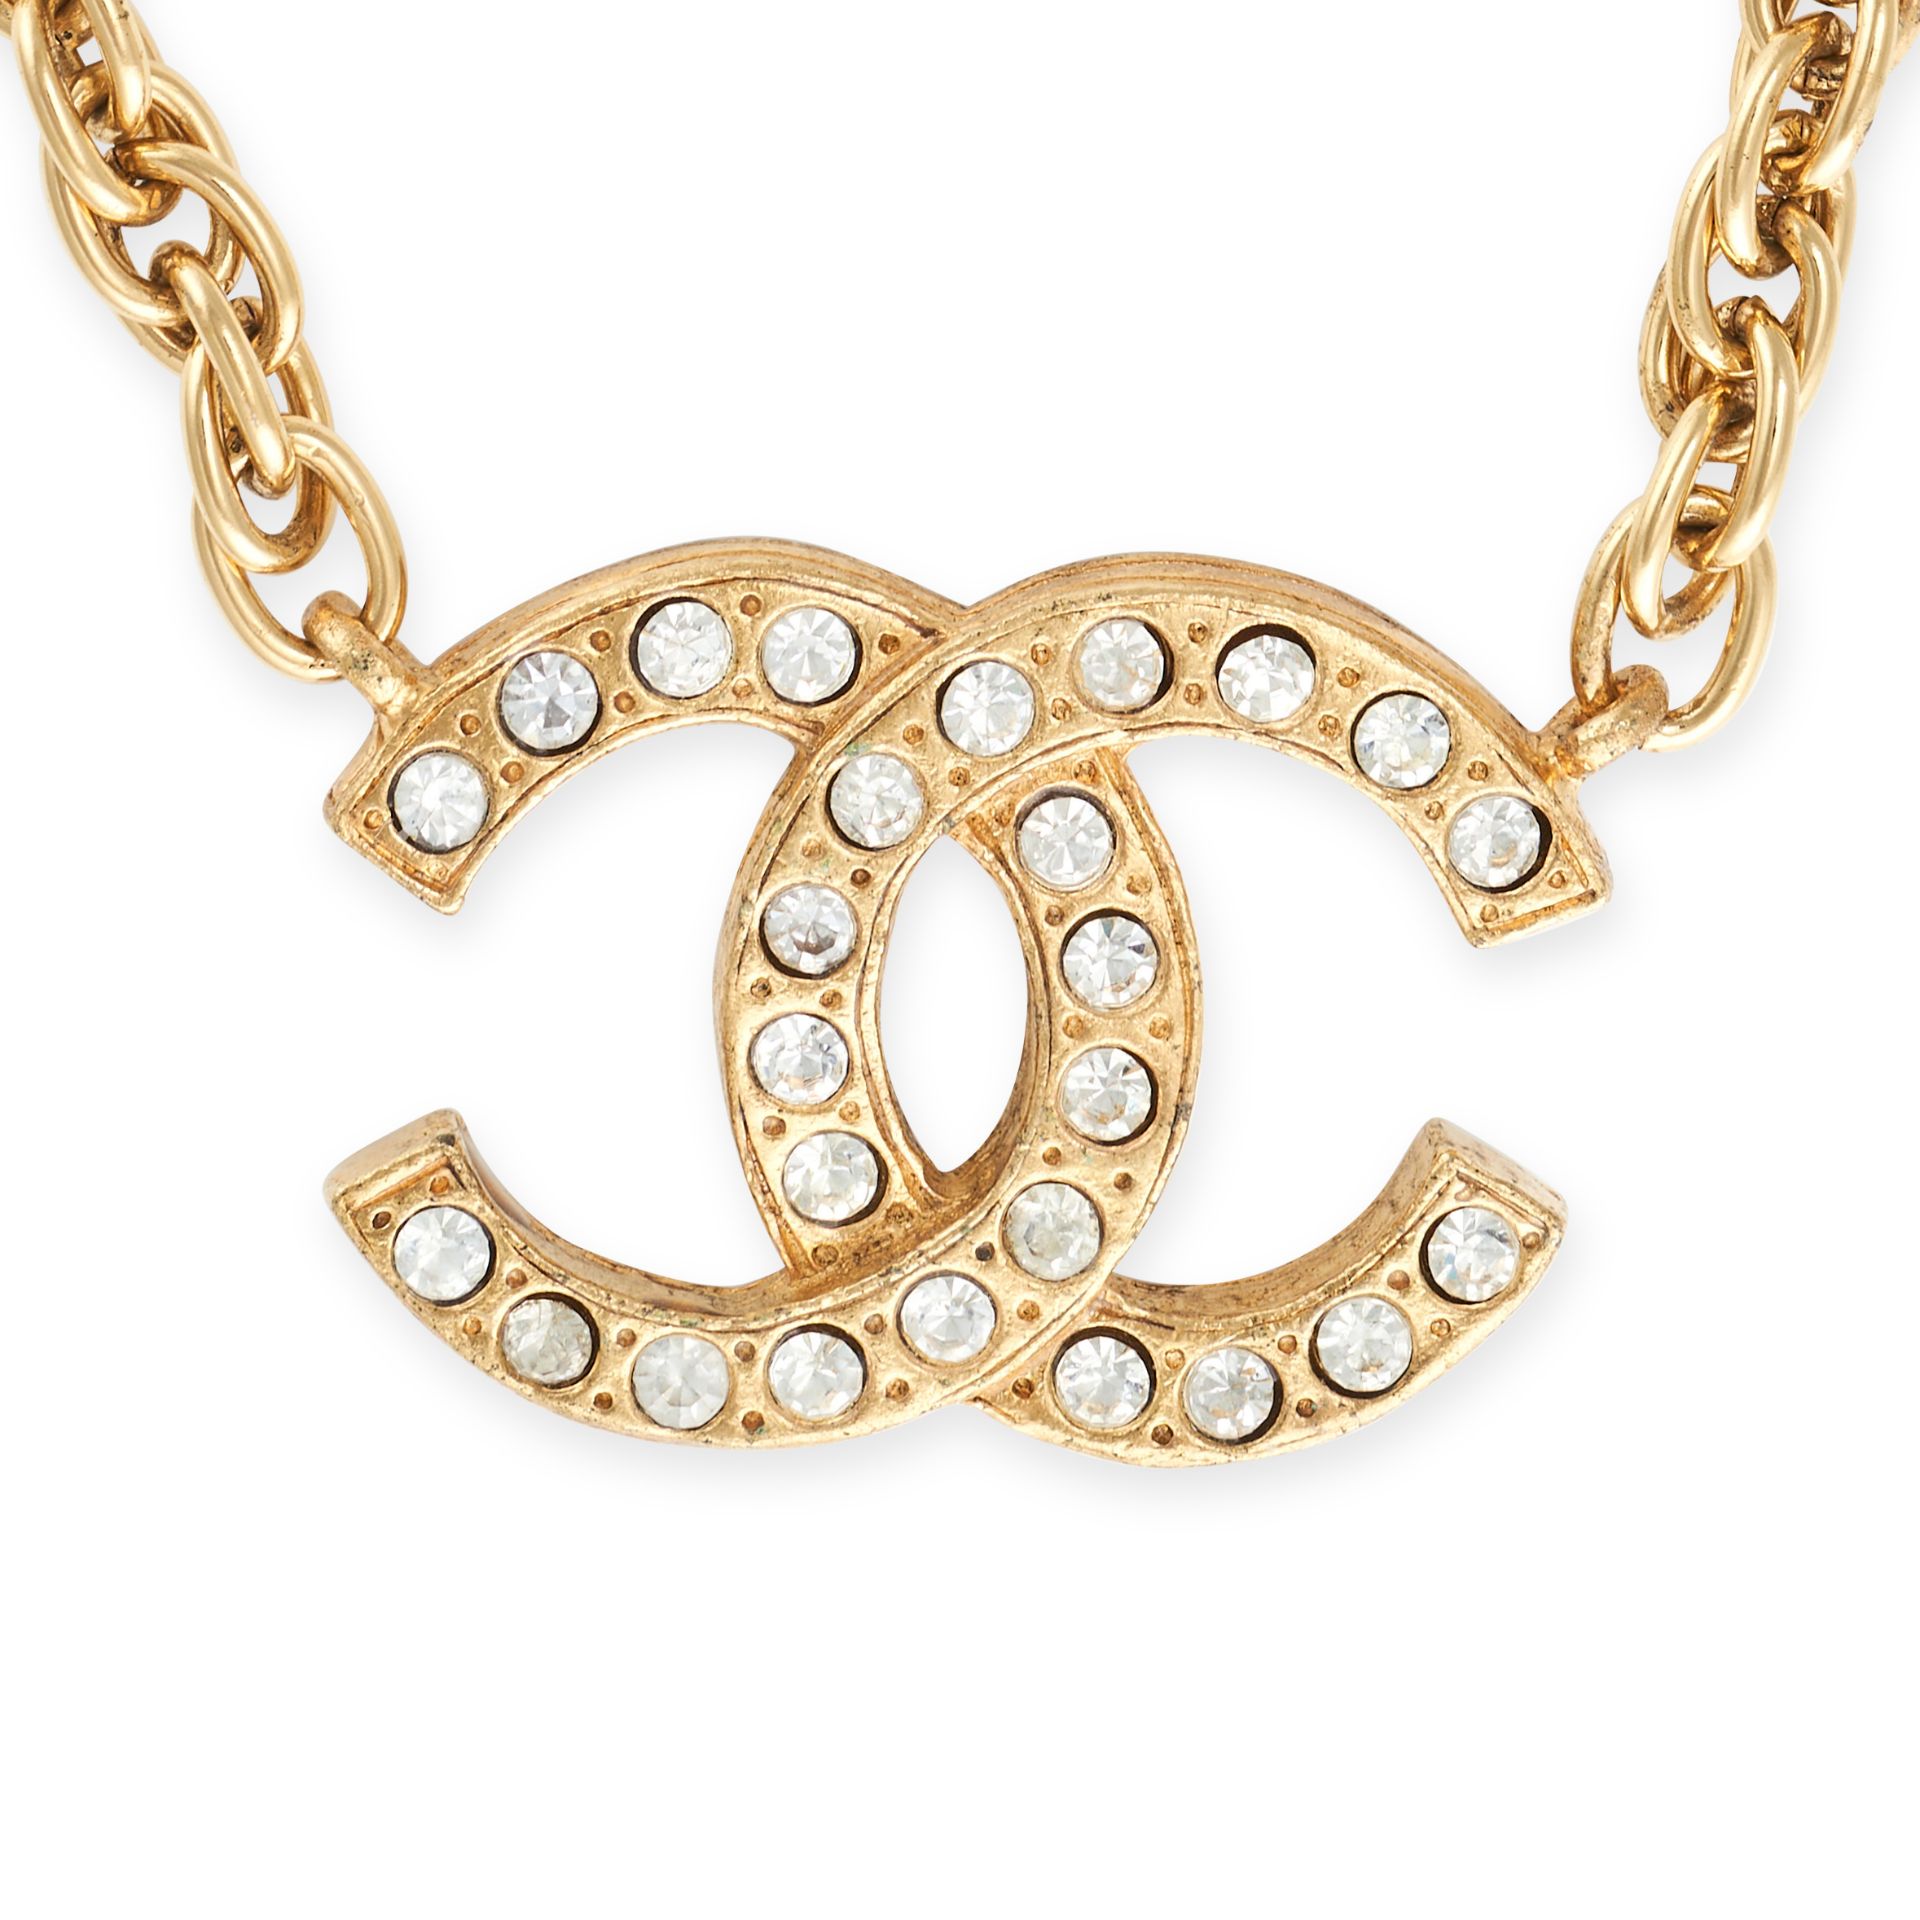 CHANEL, A CRYSTAL CC PENDANT AND CHAIN comprising a crystal embellished pendant with interlocking... - Image 2 of 2